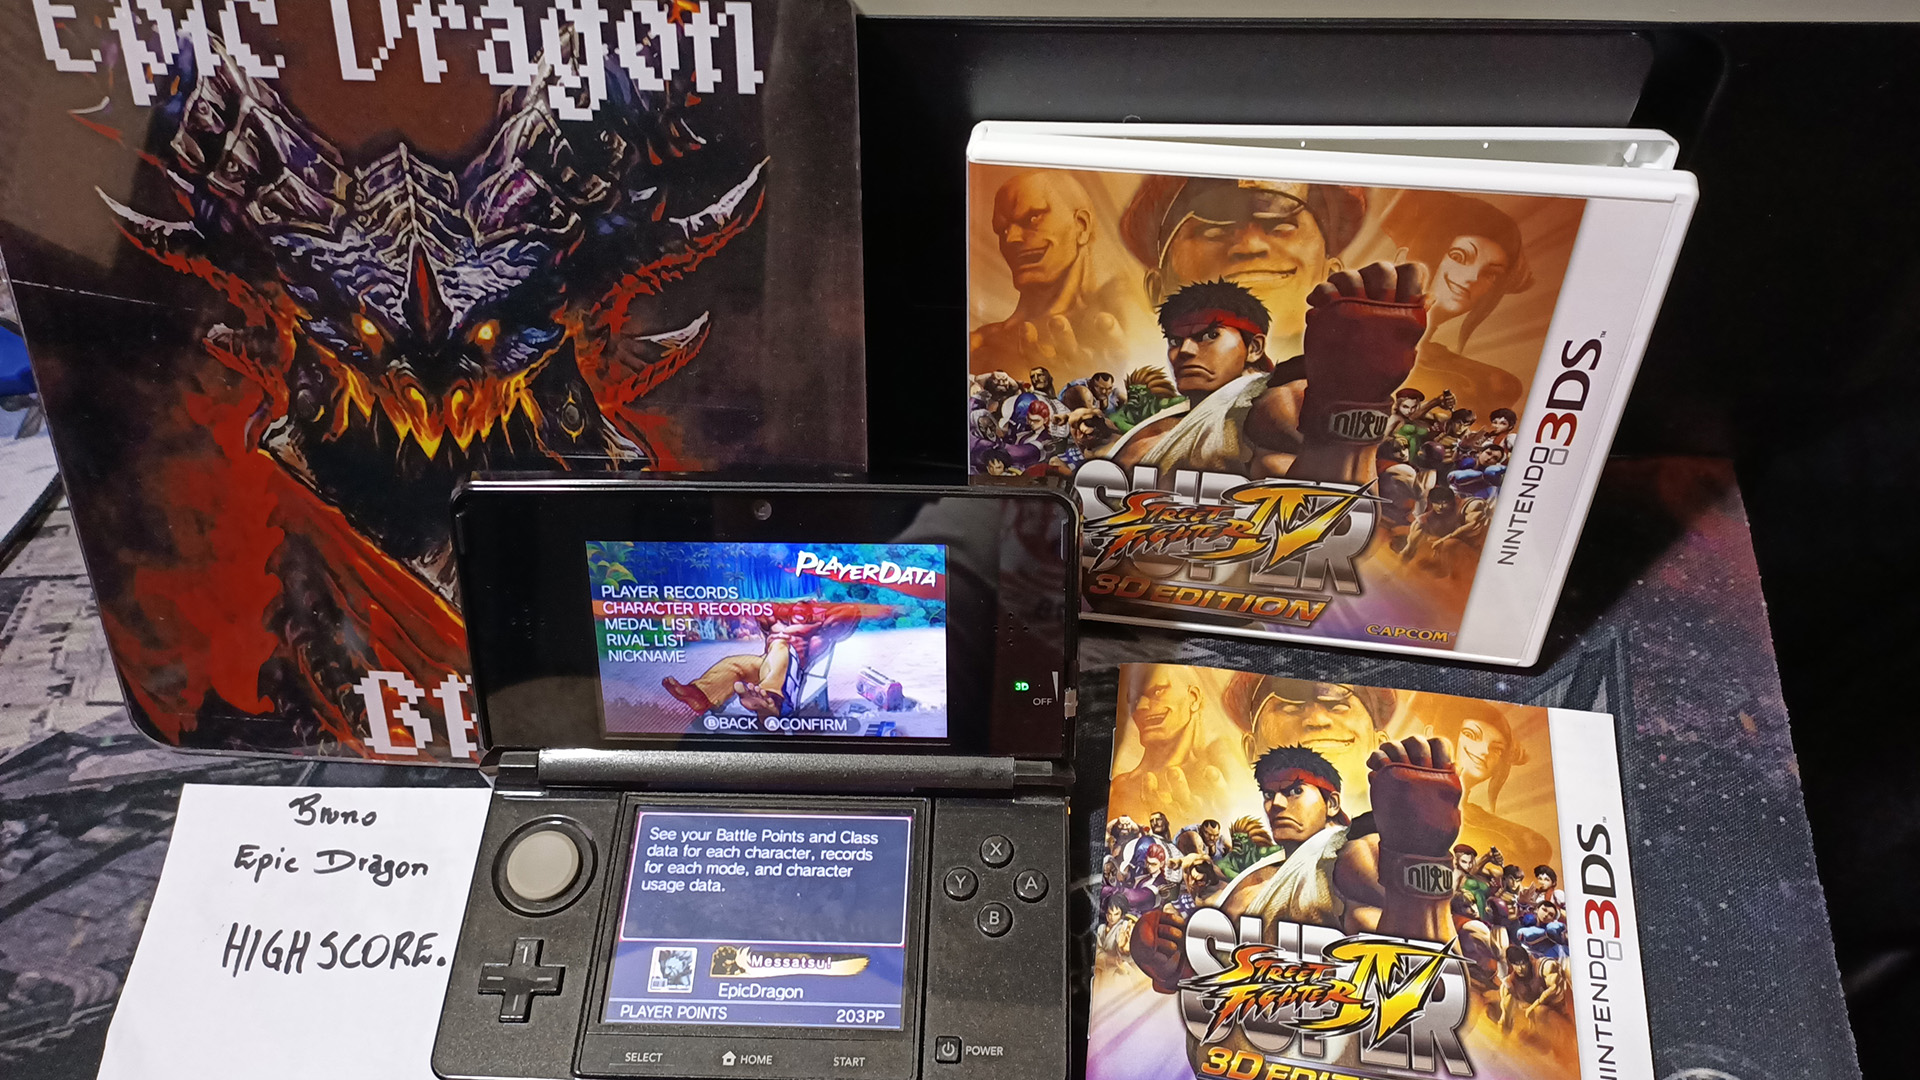 EpicDragon: Super Street Fighter IV 3D Edition: Challenge: Car Crusher: Fei-Long (Nintendo 3DS) 112,800 points on 2022-08-01 21:01:04